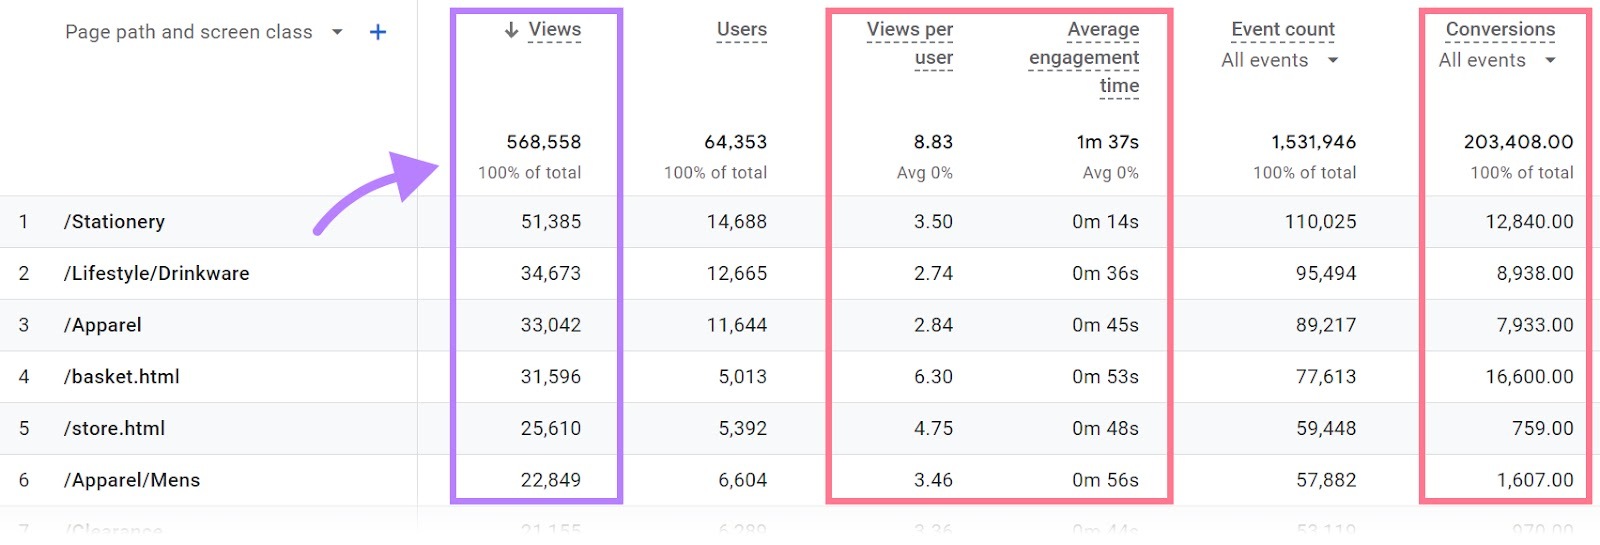 Views per user, mean  engagement time, and conversion metrics highlighted successful  Pages and screens report